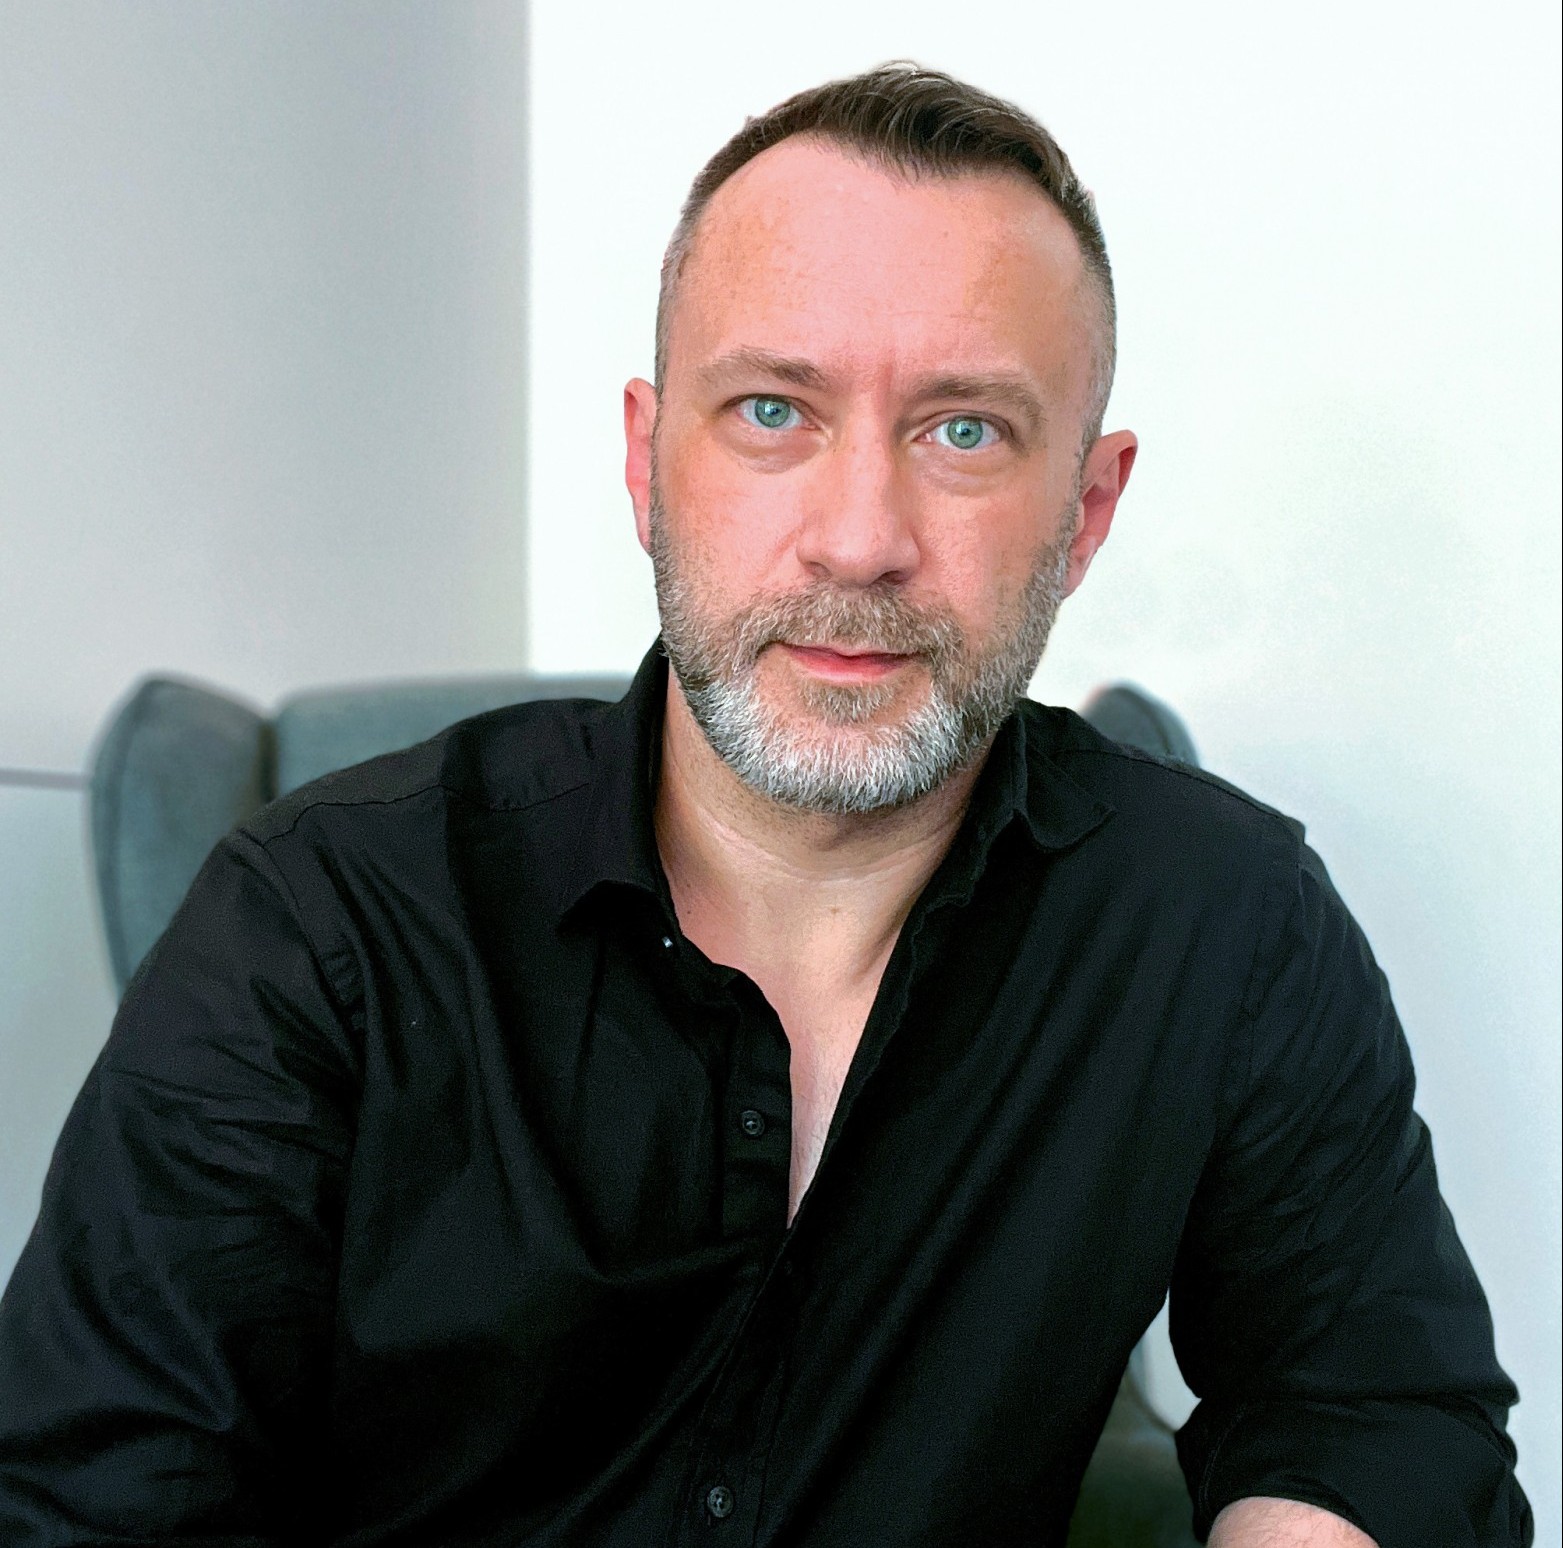 Mariusz Kozak in a black shirt in front of a white background